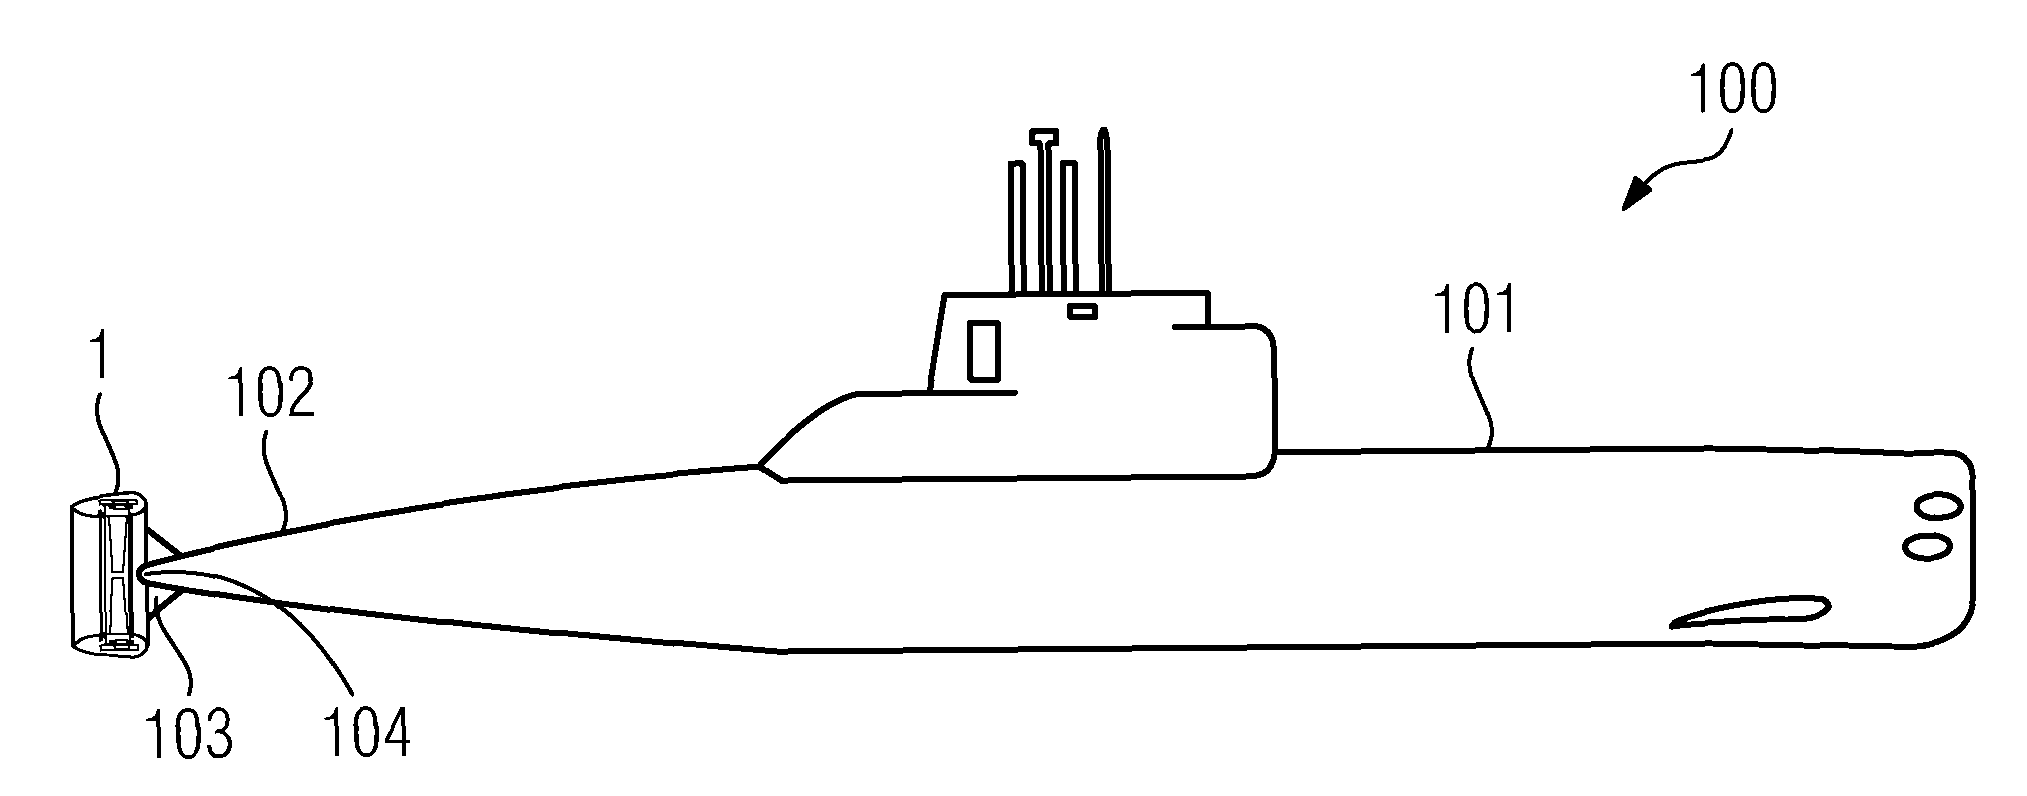 Submarine with a propulsion drive with an electric motor ring